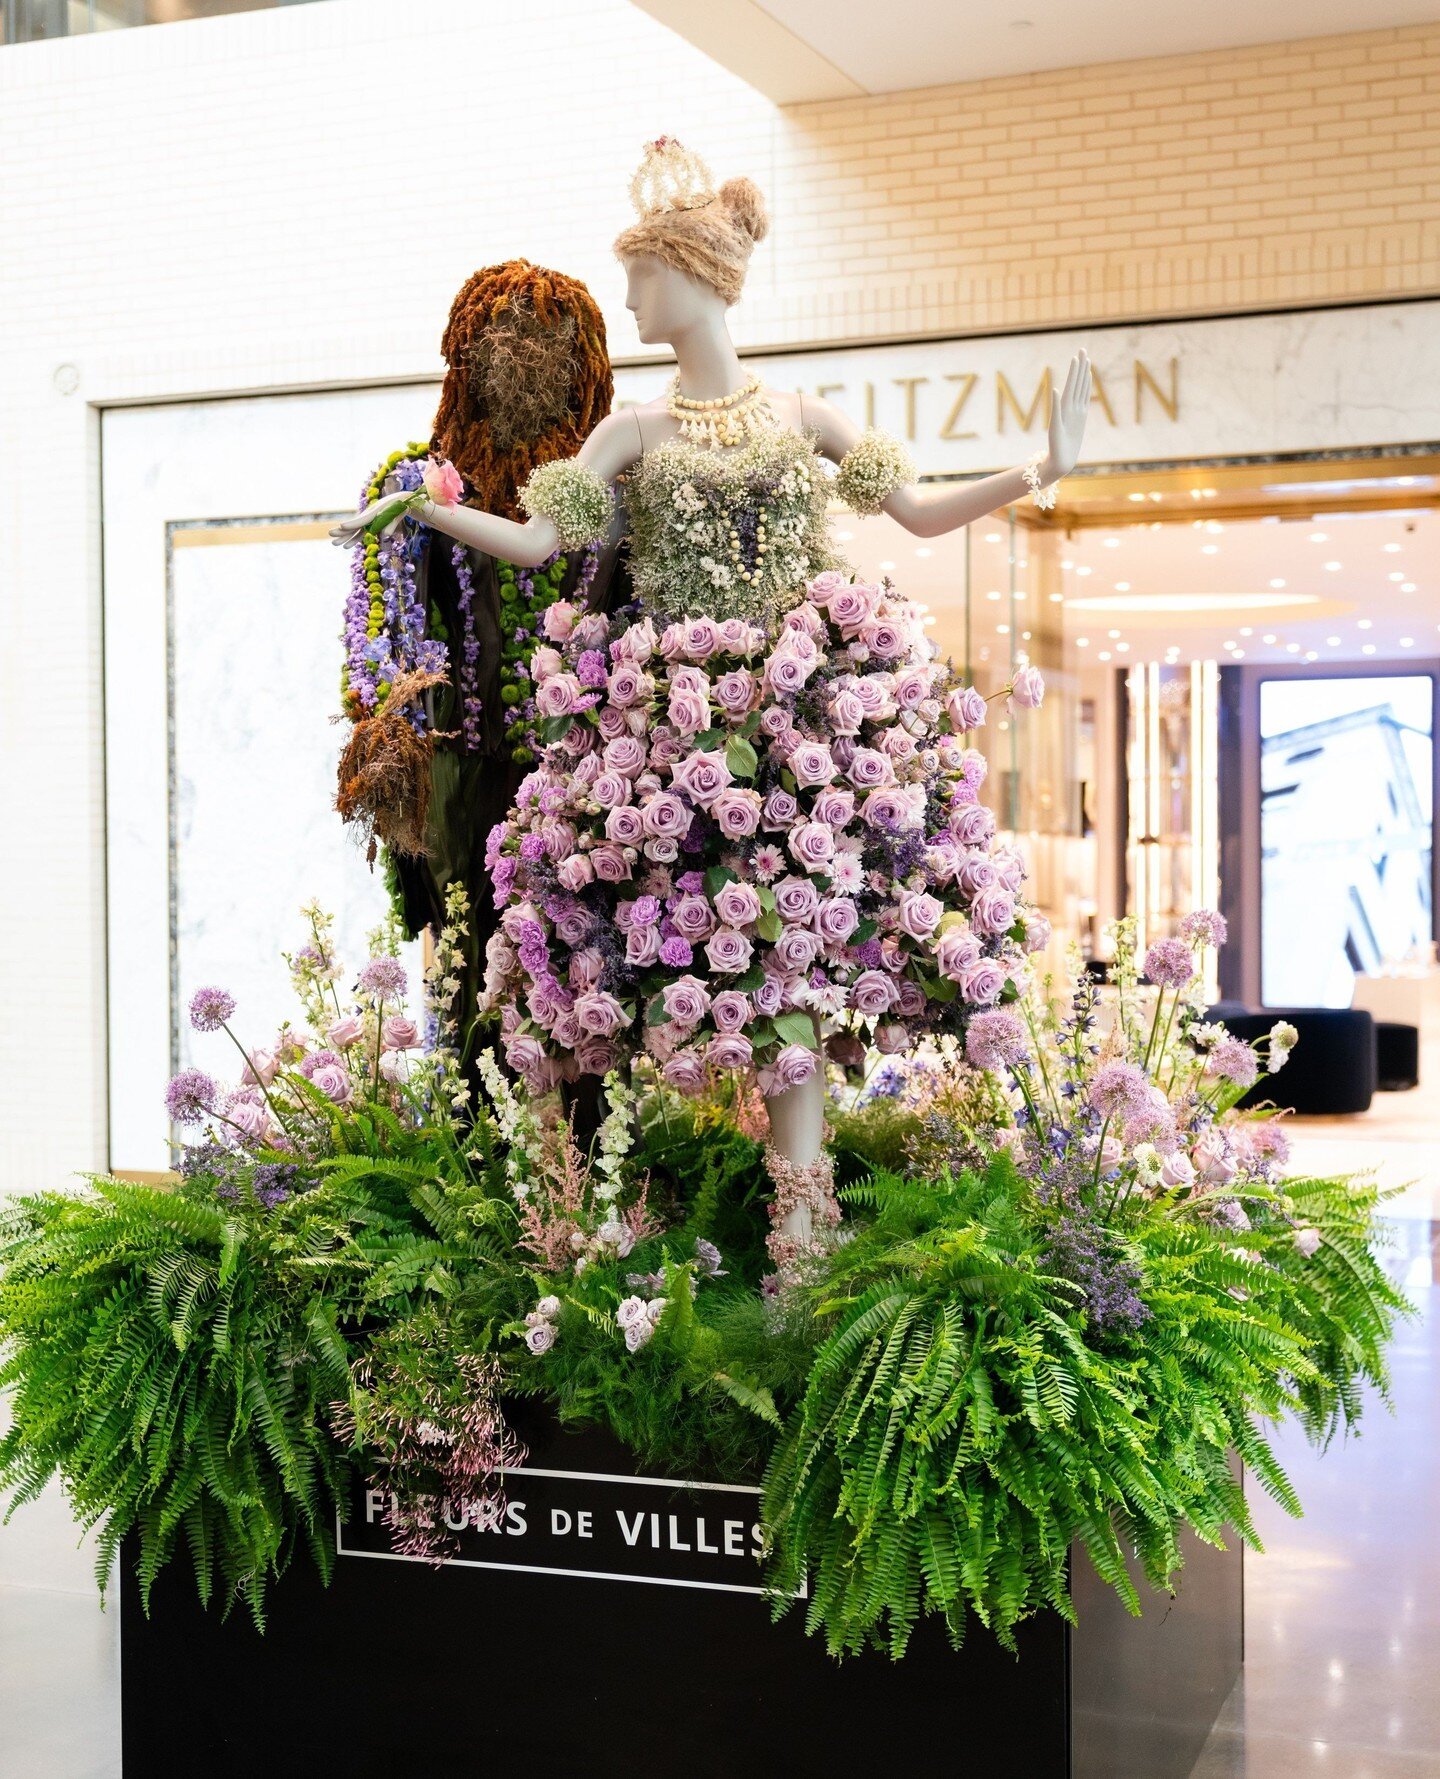 Come experience the artistry of flowers in Fleurs de Villes ARTISTE, a world-renowned floral exhibition on view at North Park Center! ⁠
⁠
Our queen bee @lizziebeesflowershoppe and her team had the honor of designing this installation for this unique 